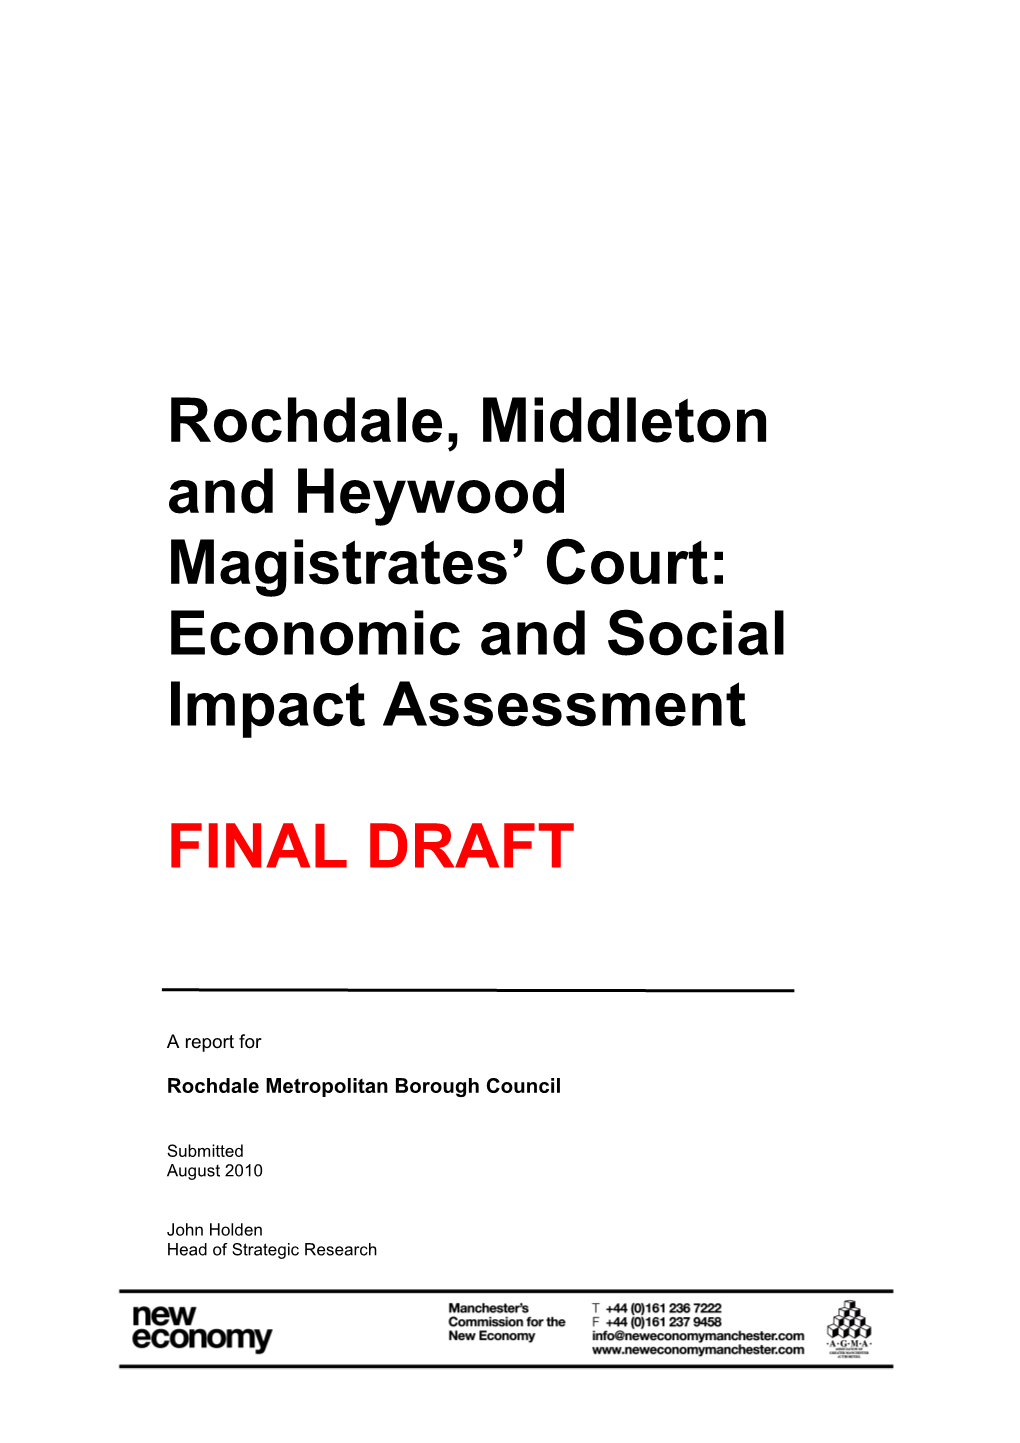 Rochdale, Middleton and Heywood Magistrates' Court